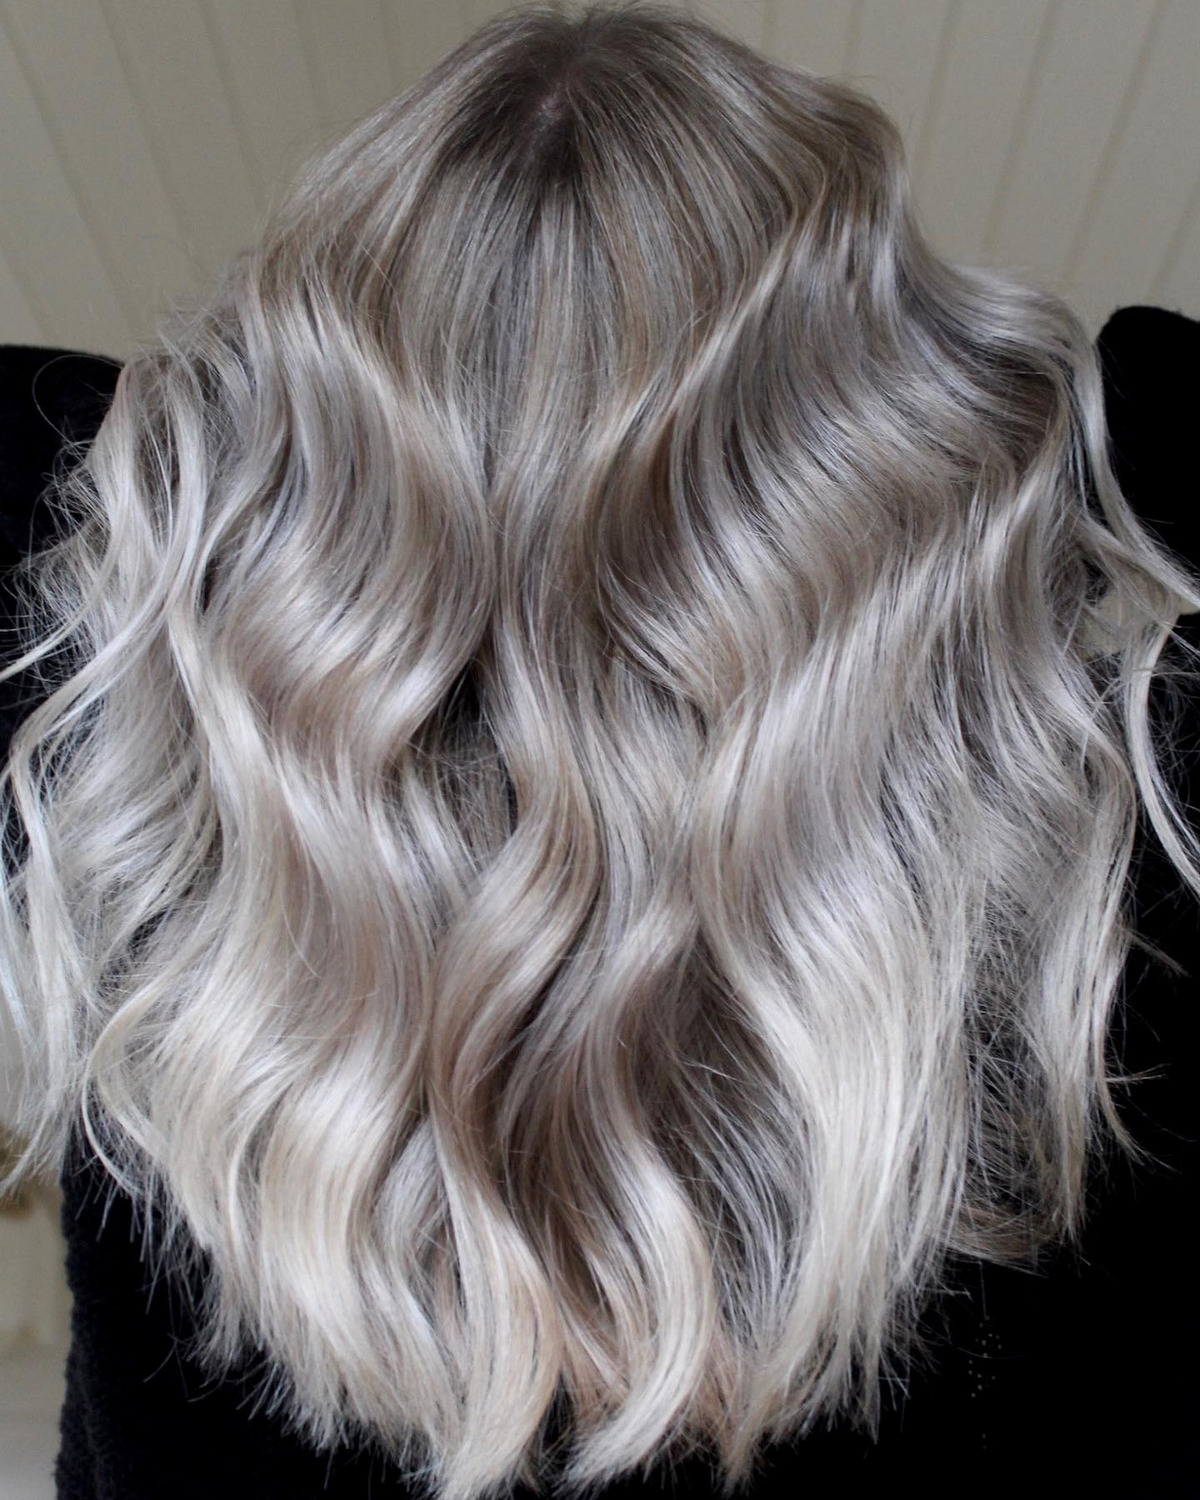 35 Platinum Hair Shades Ideas to Brighten Your Look - Hood MWR